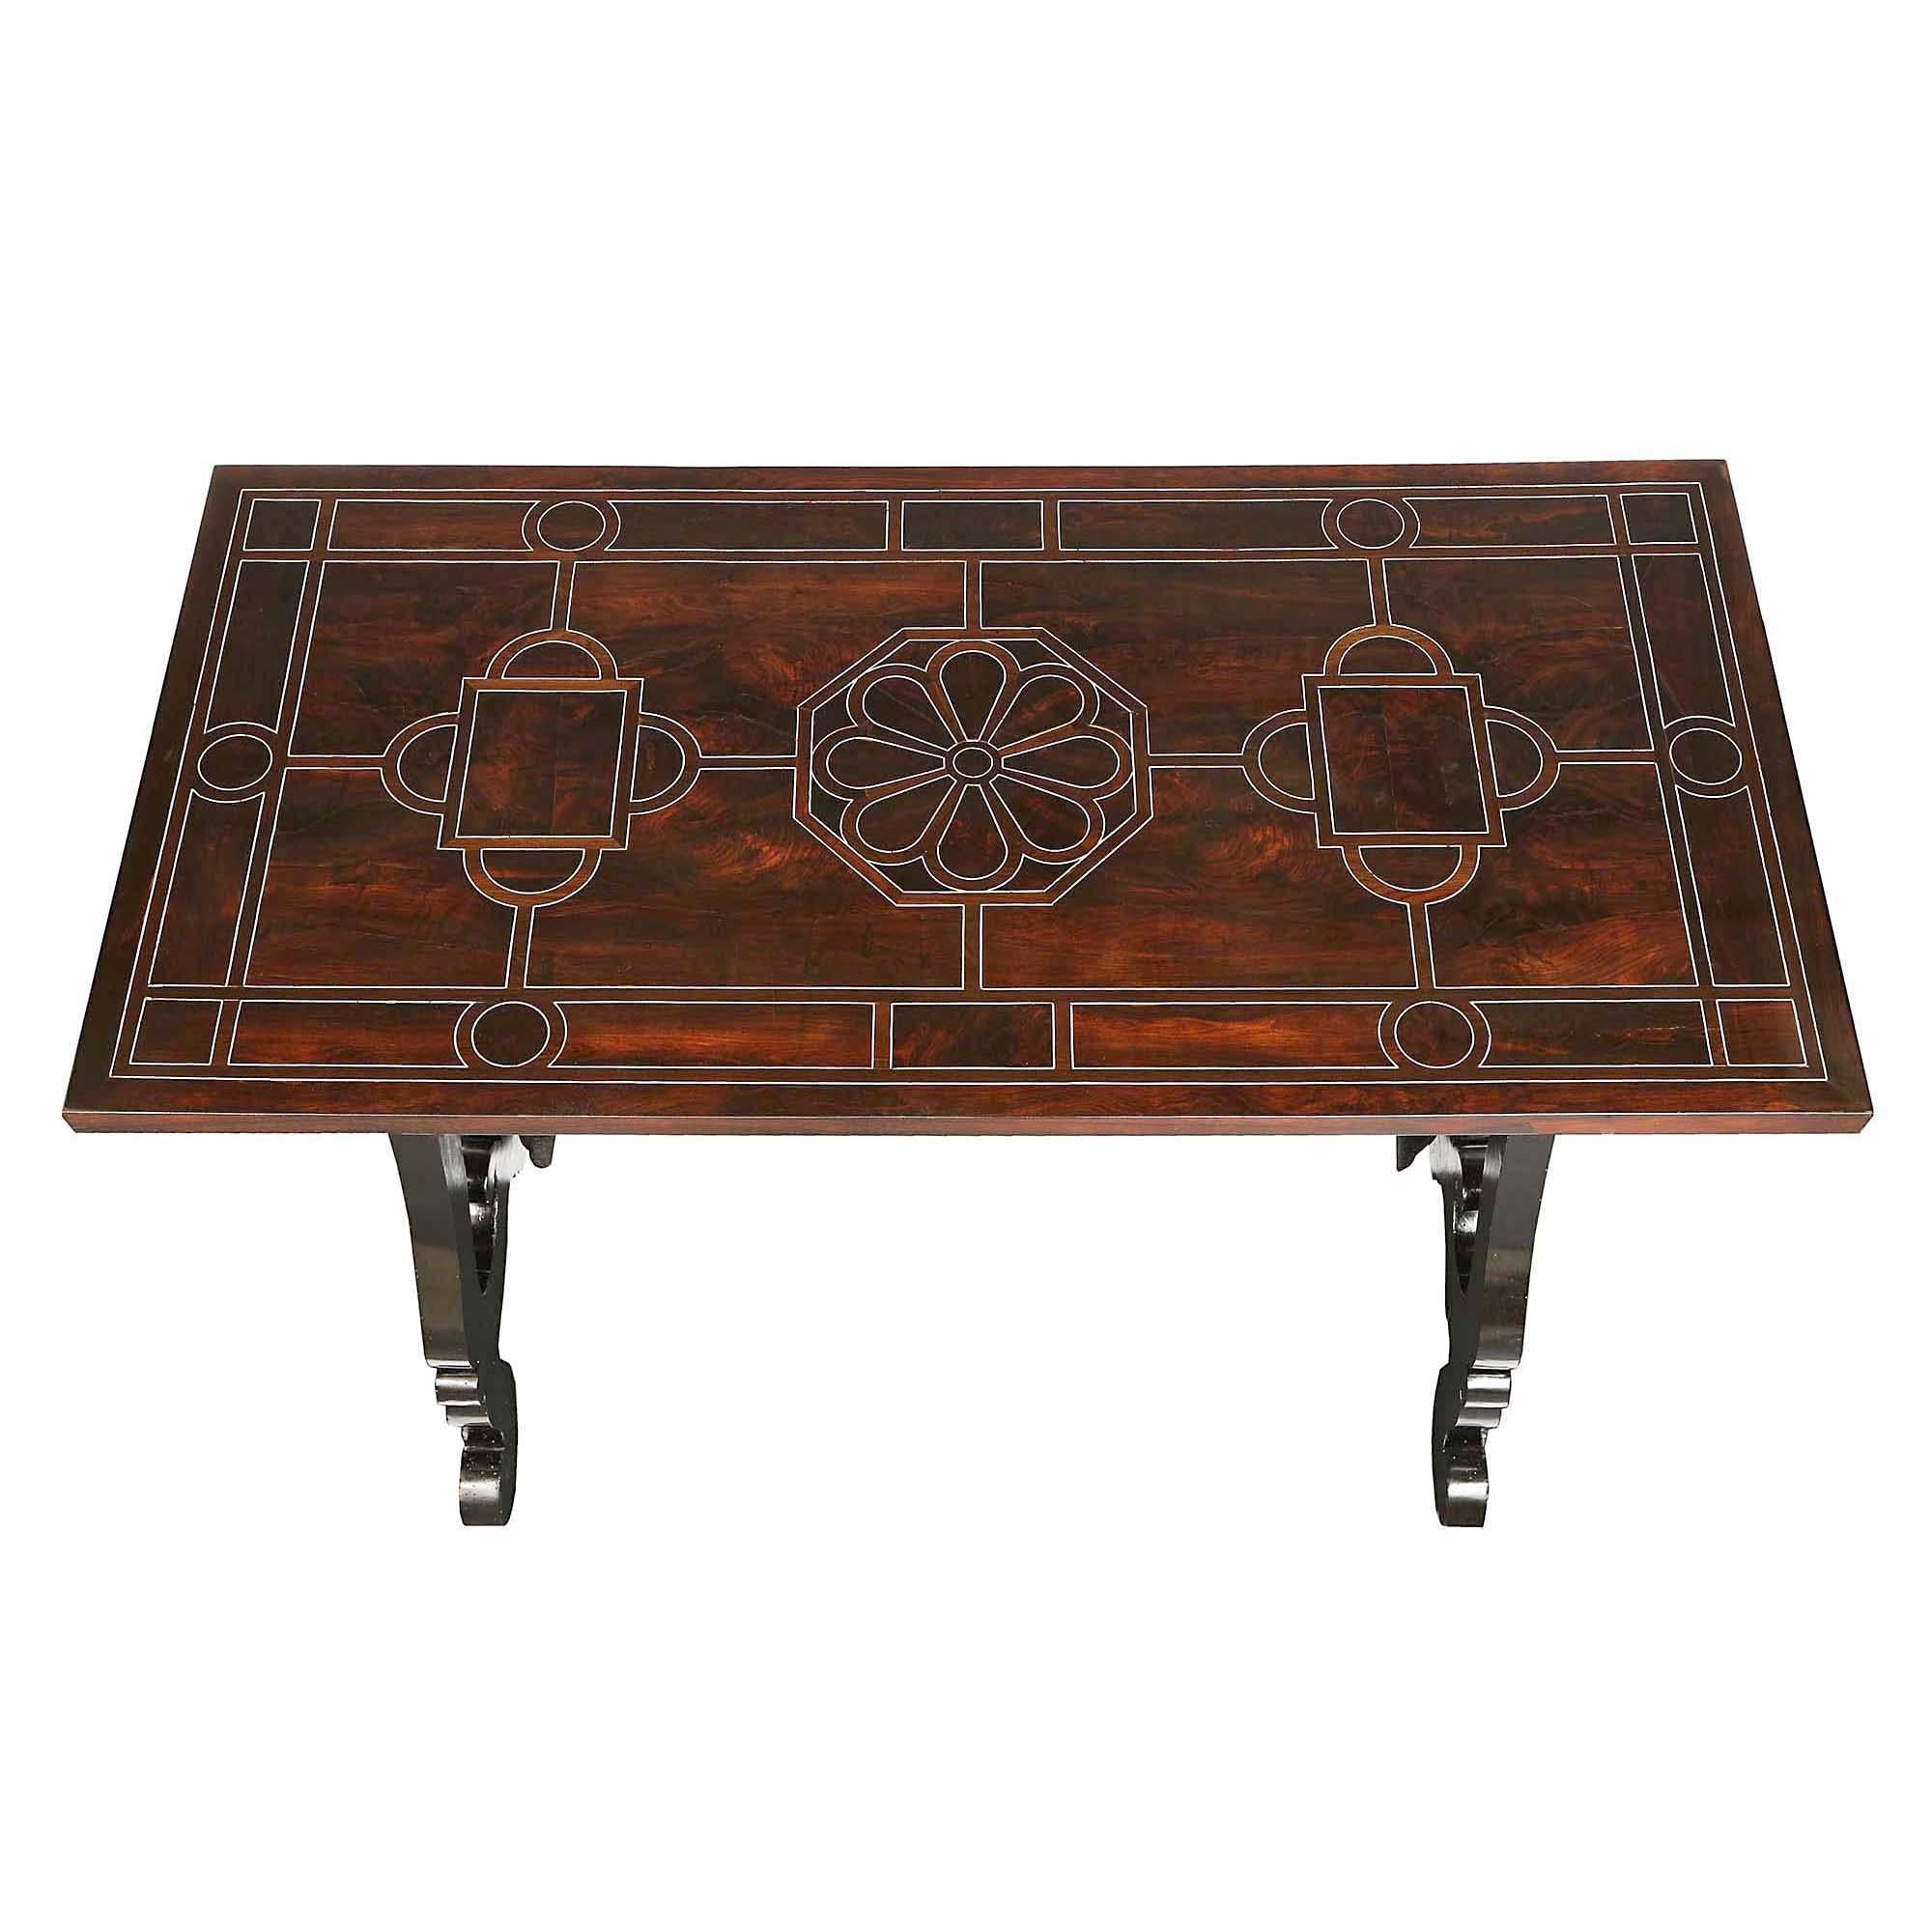 A rare and stunning pair of Italian 17th century rosewood and ebonized fruitwood trestle tables from Florence. The outstanding tables are raised by handsome scrolled ebonized fruitwood supports connected by impressive original hand beaten wrought